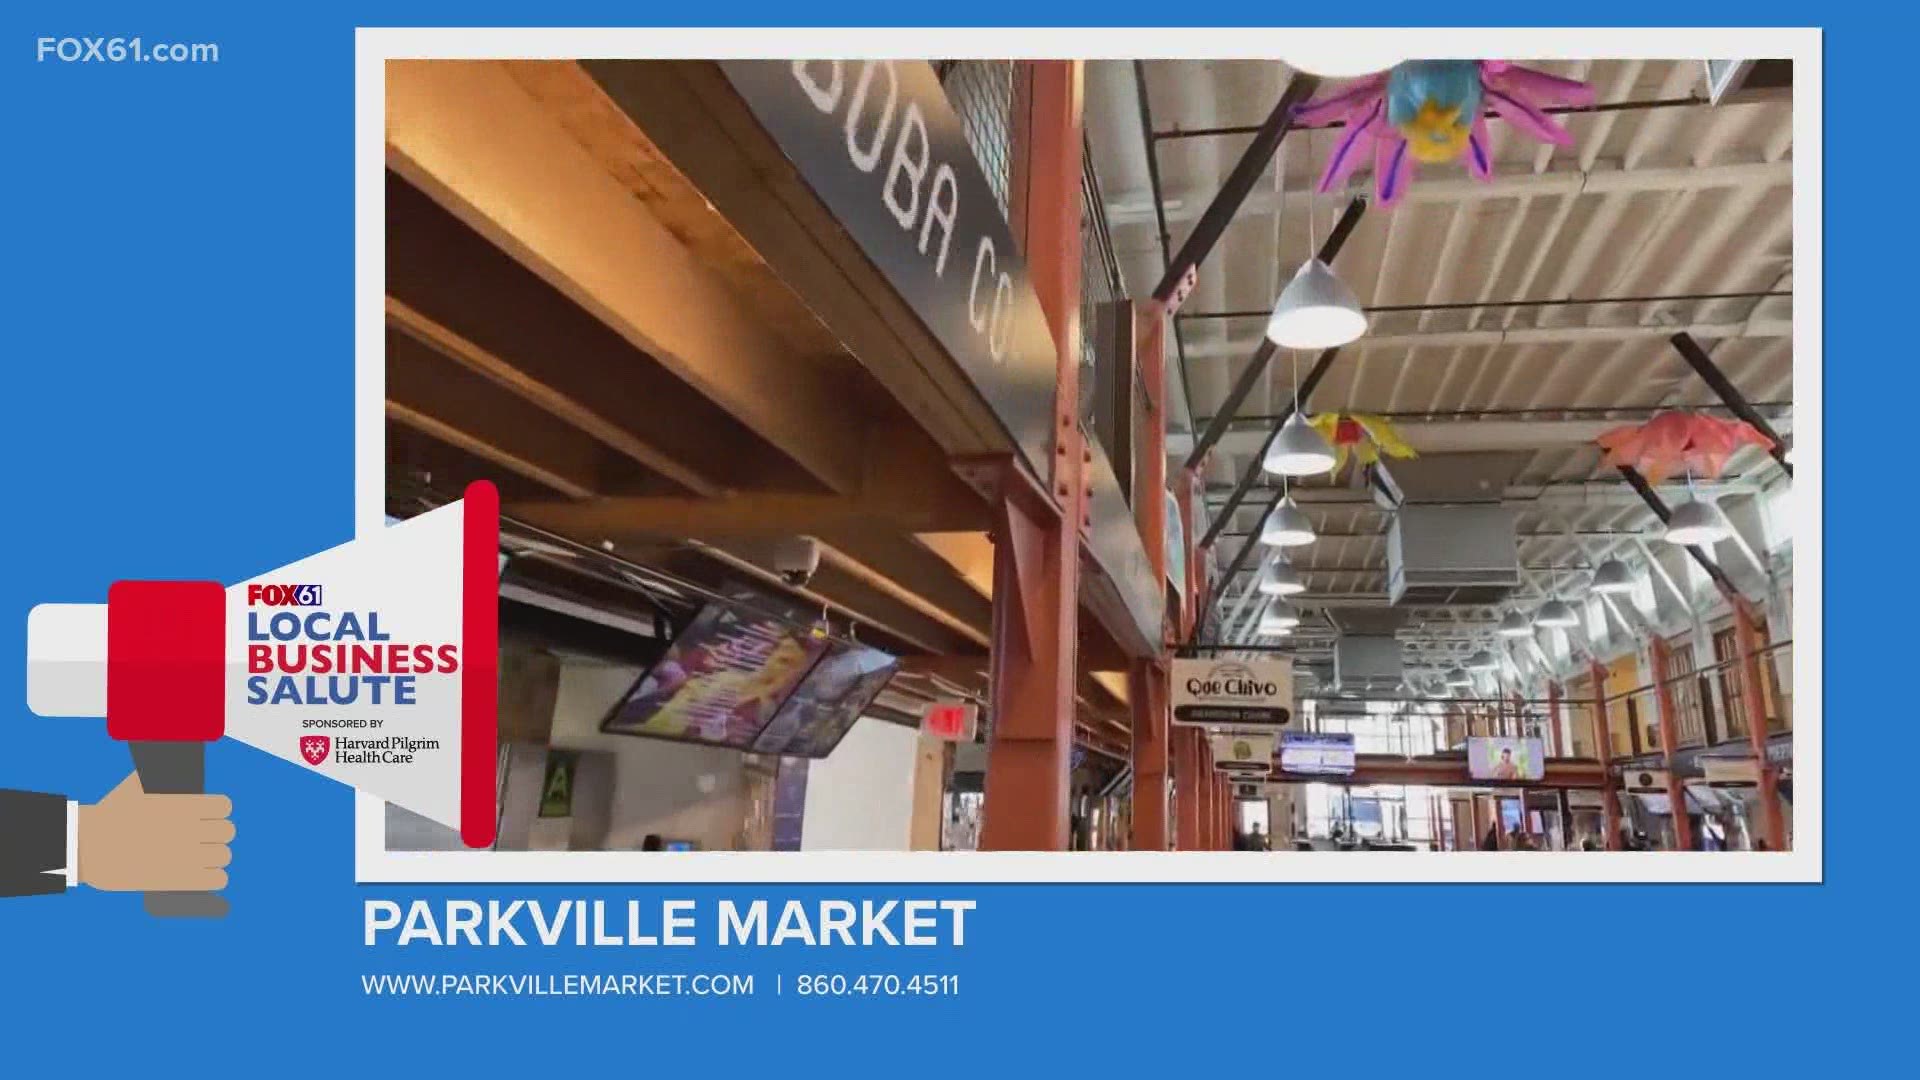 Parkville Market offers a dining and shopping experience in Hartford.